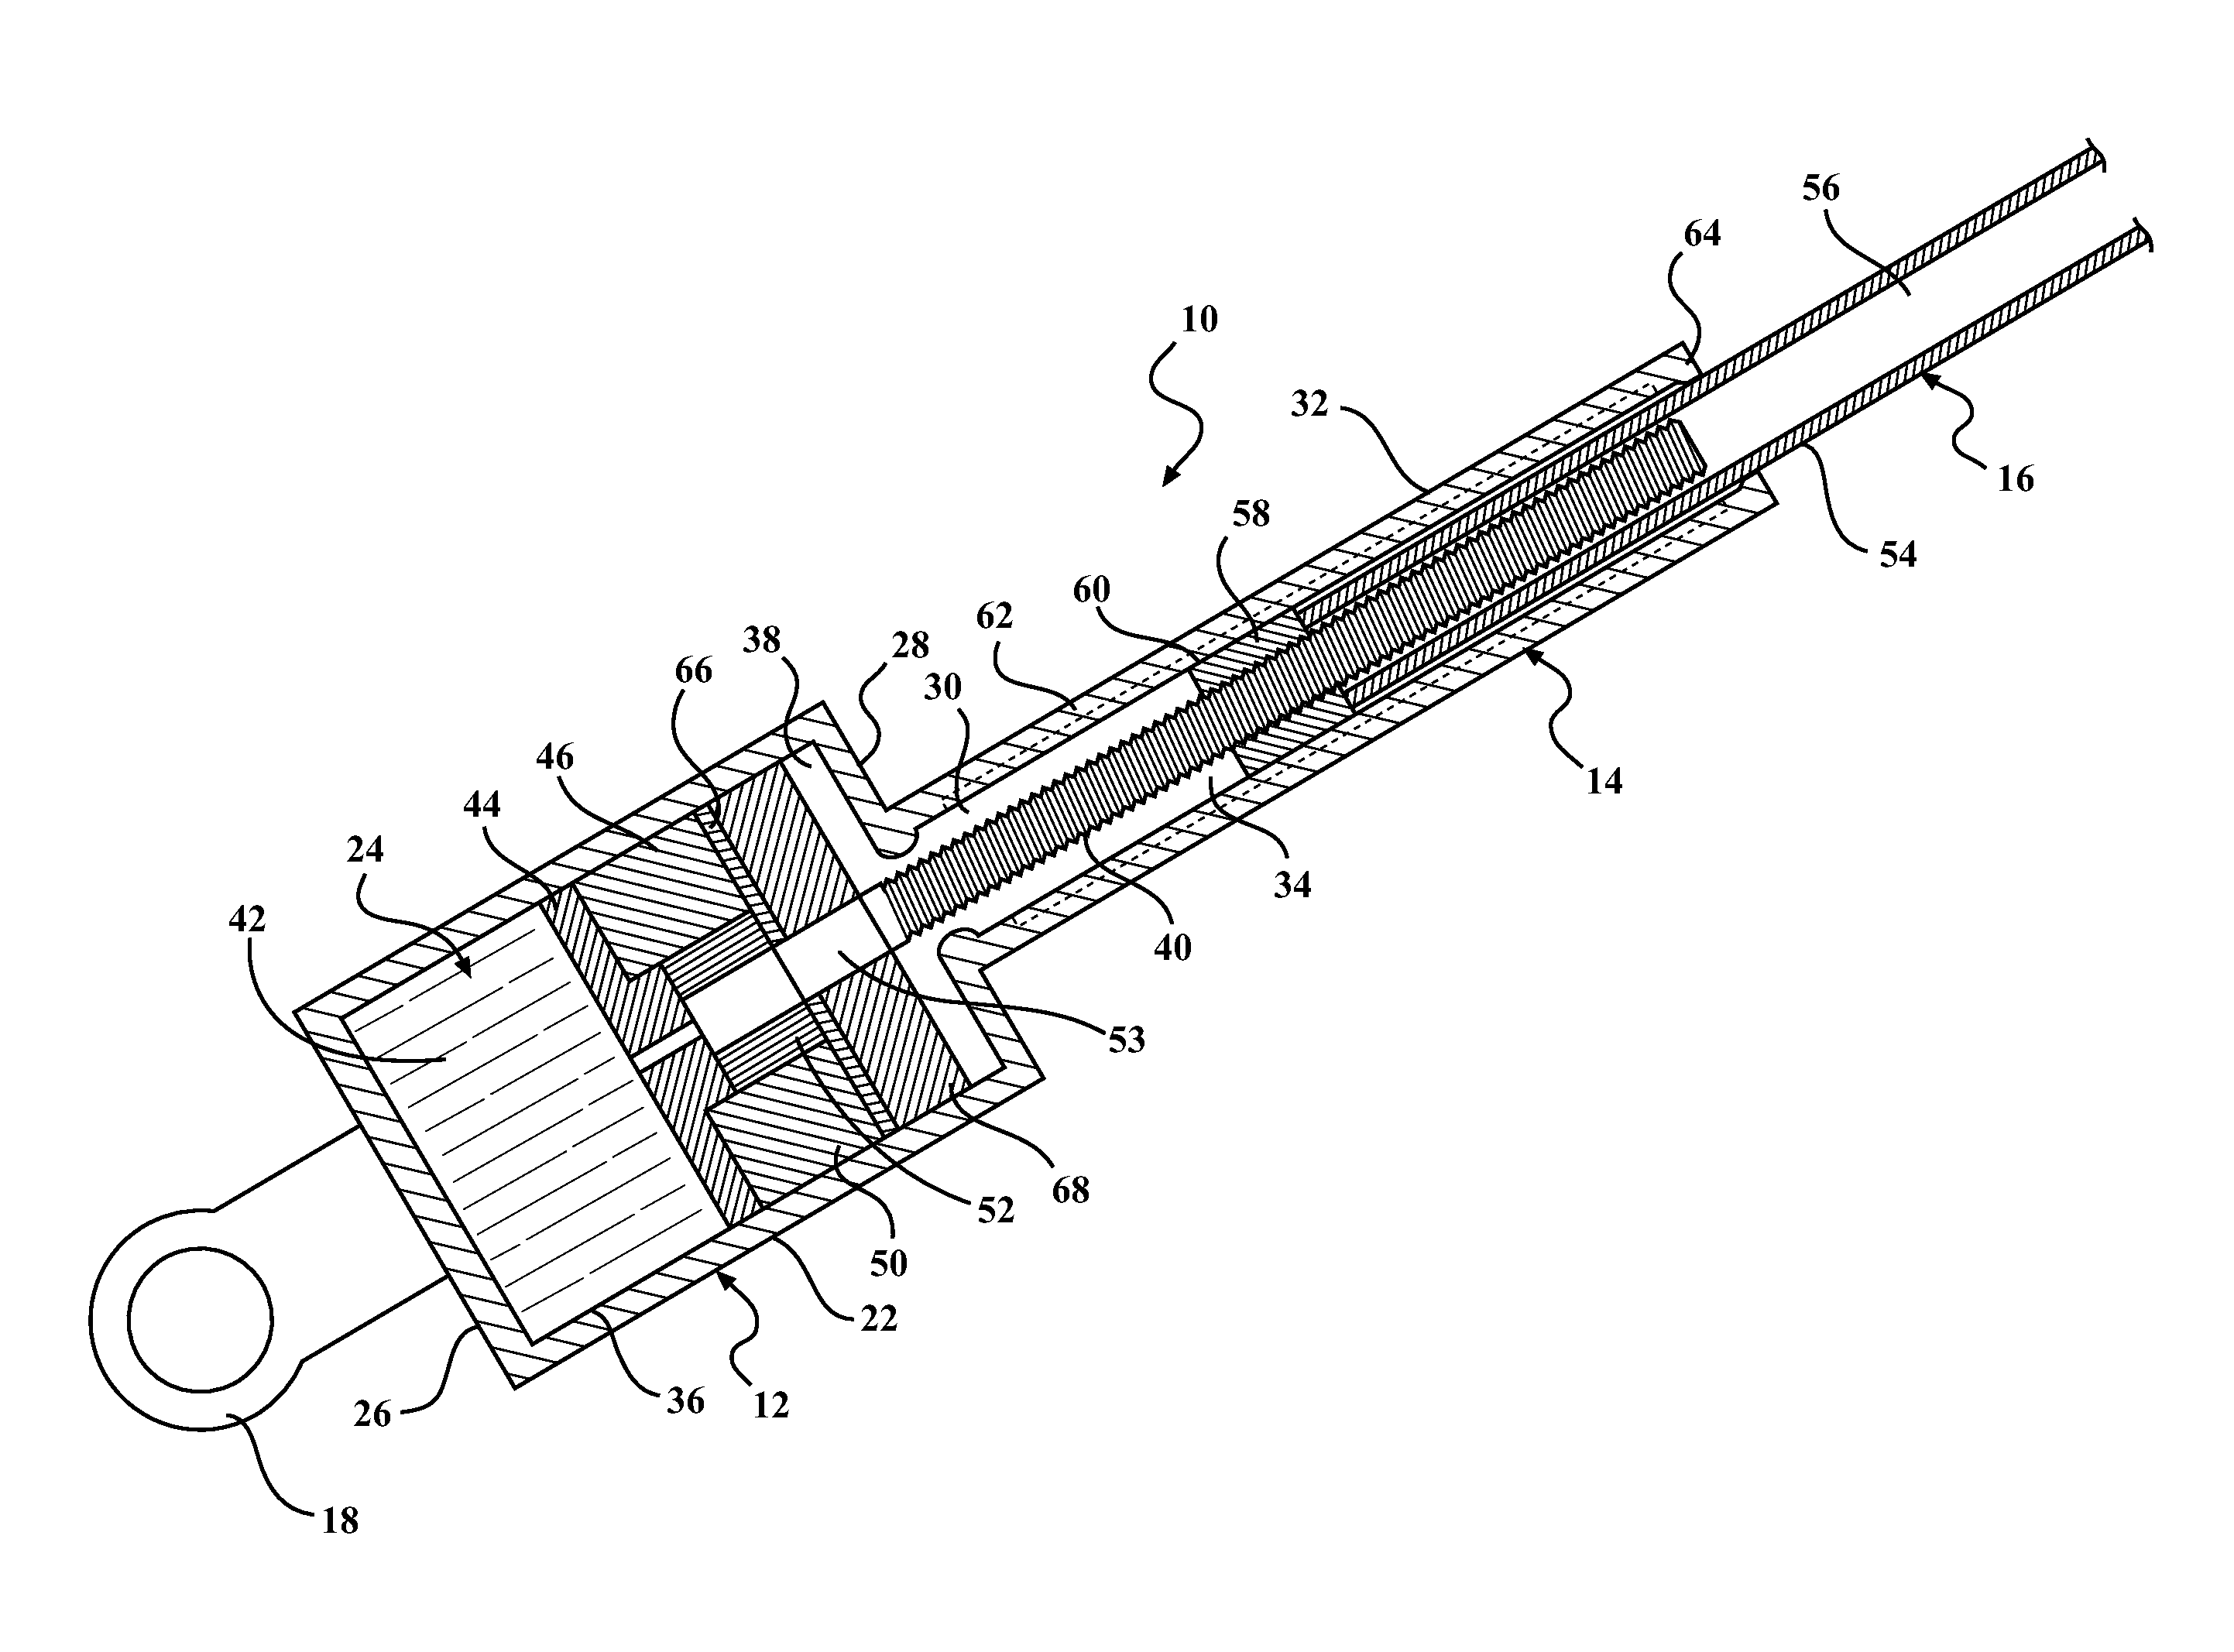 Electromechanical strut with integrated flex coupling and slip device and clutch/coupling assembly therefor